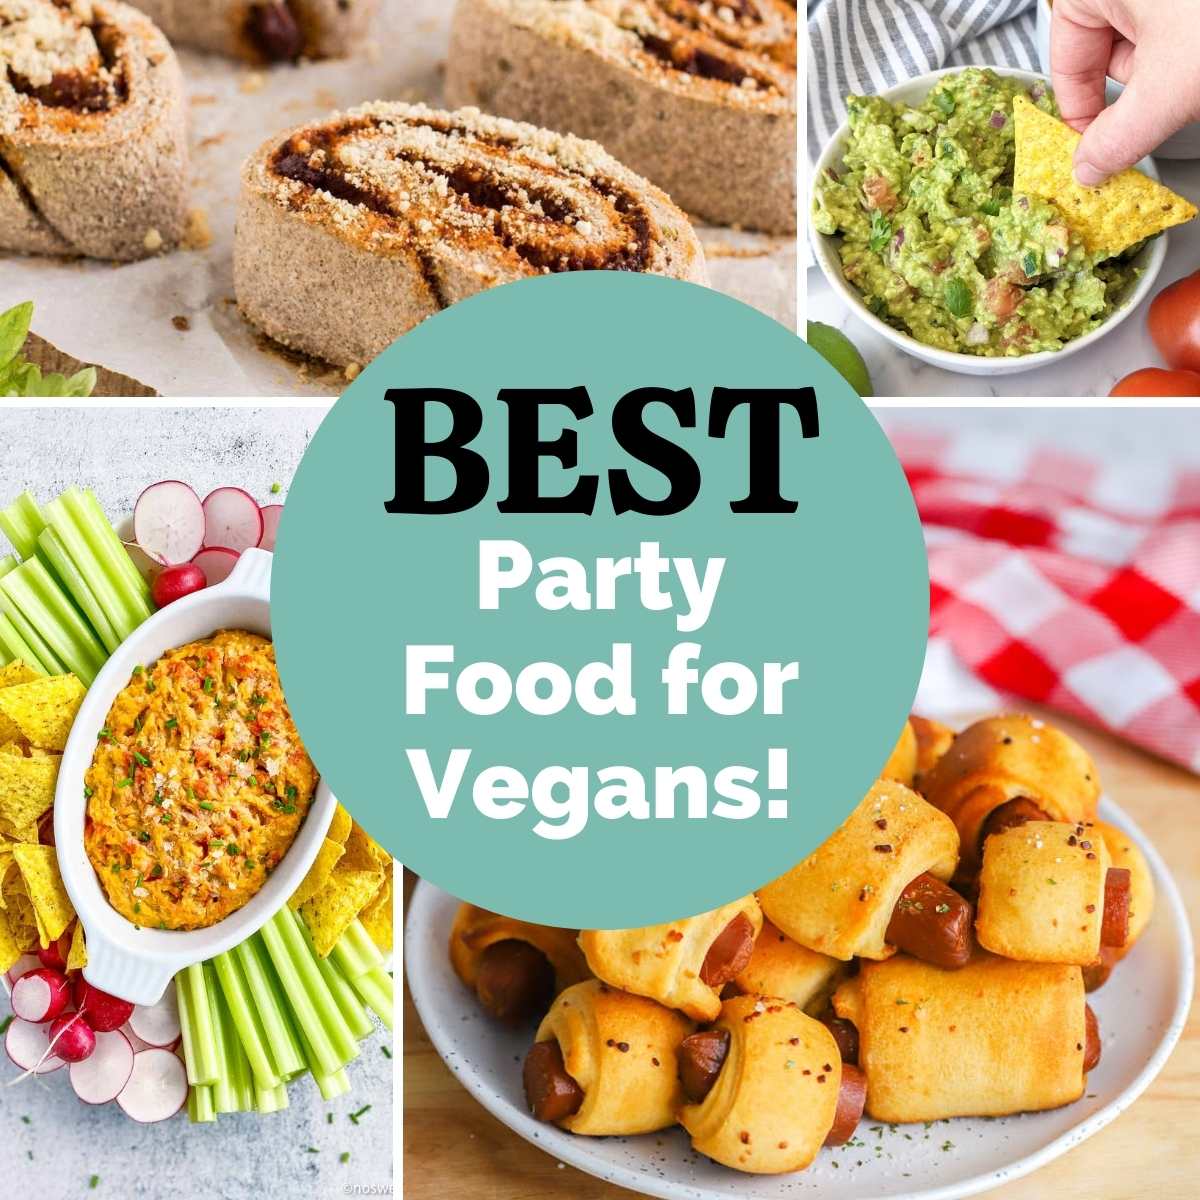 Collage of vegan party food recipes with text overlay "Best Party Food for Vegans!"